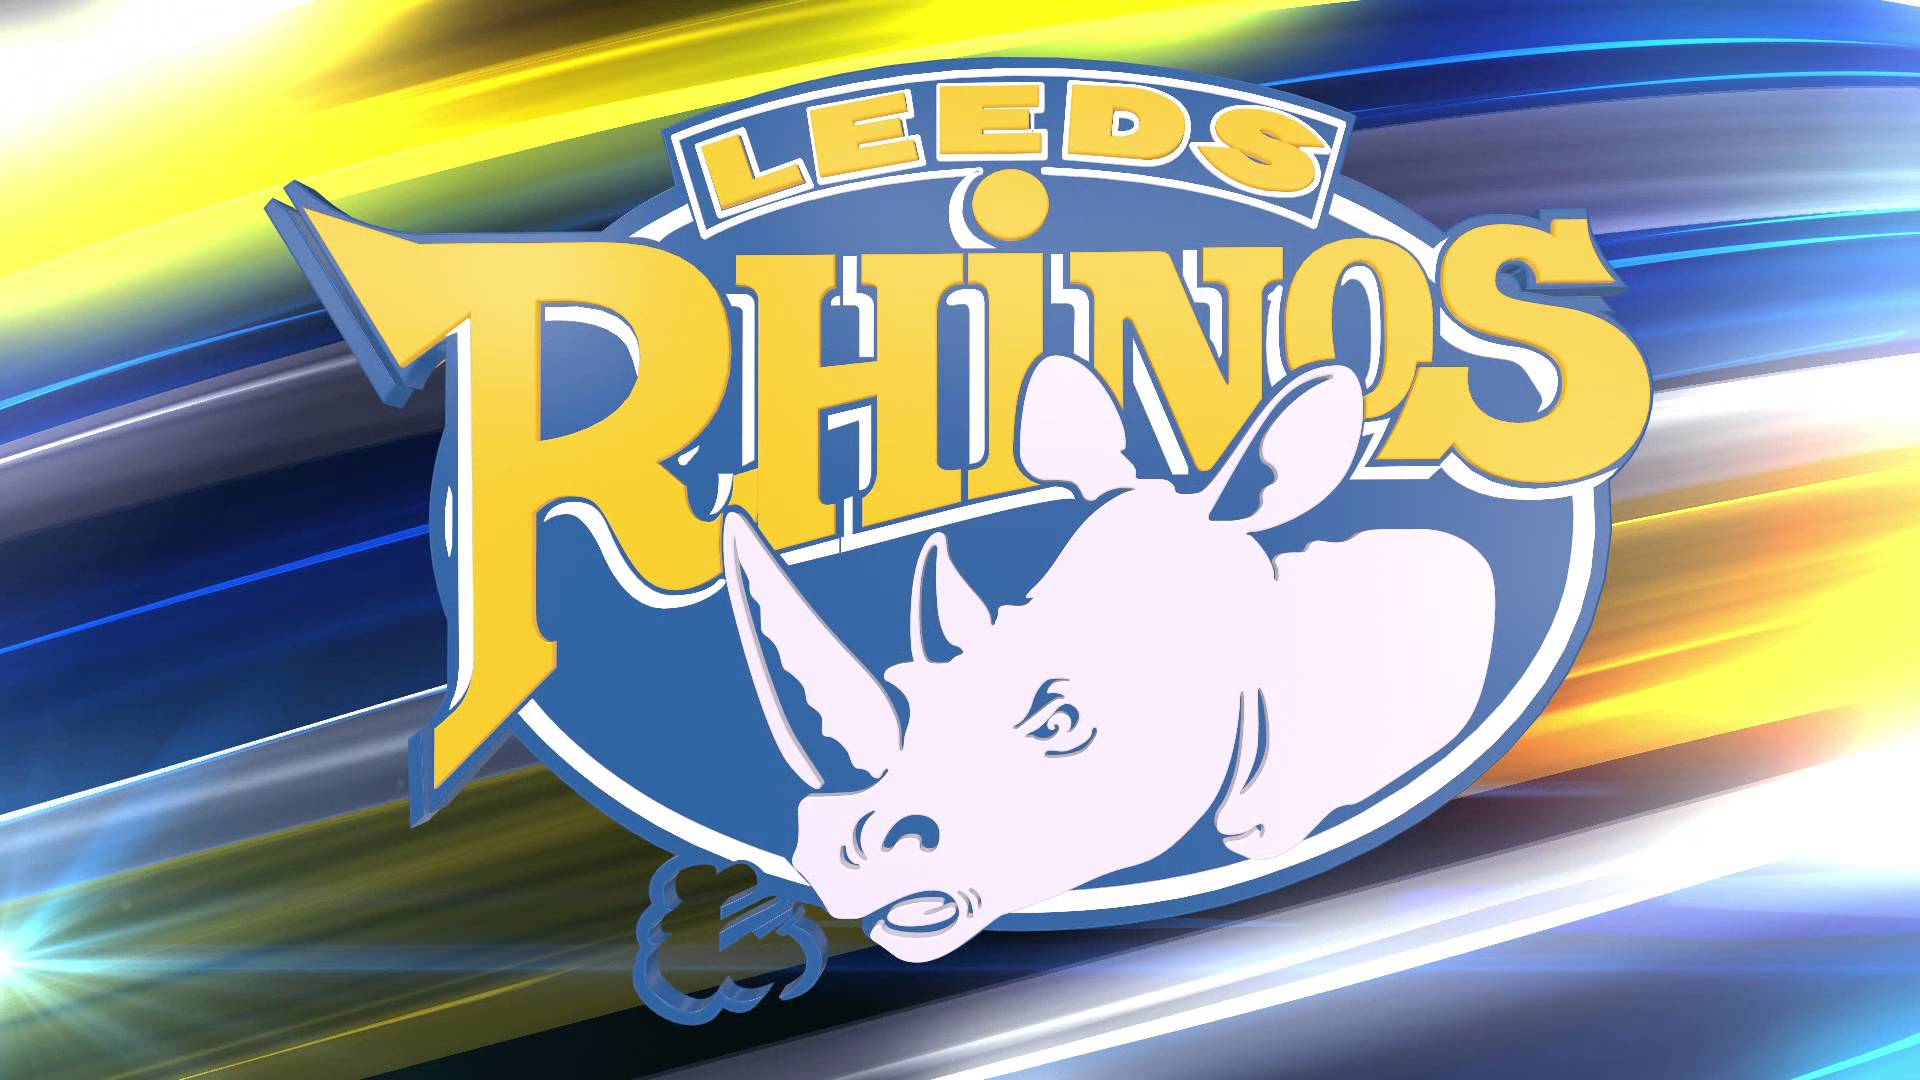 Download Leeds Rhinos wallpaper to your cell phone rhinos